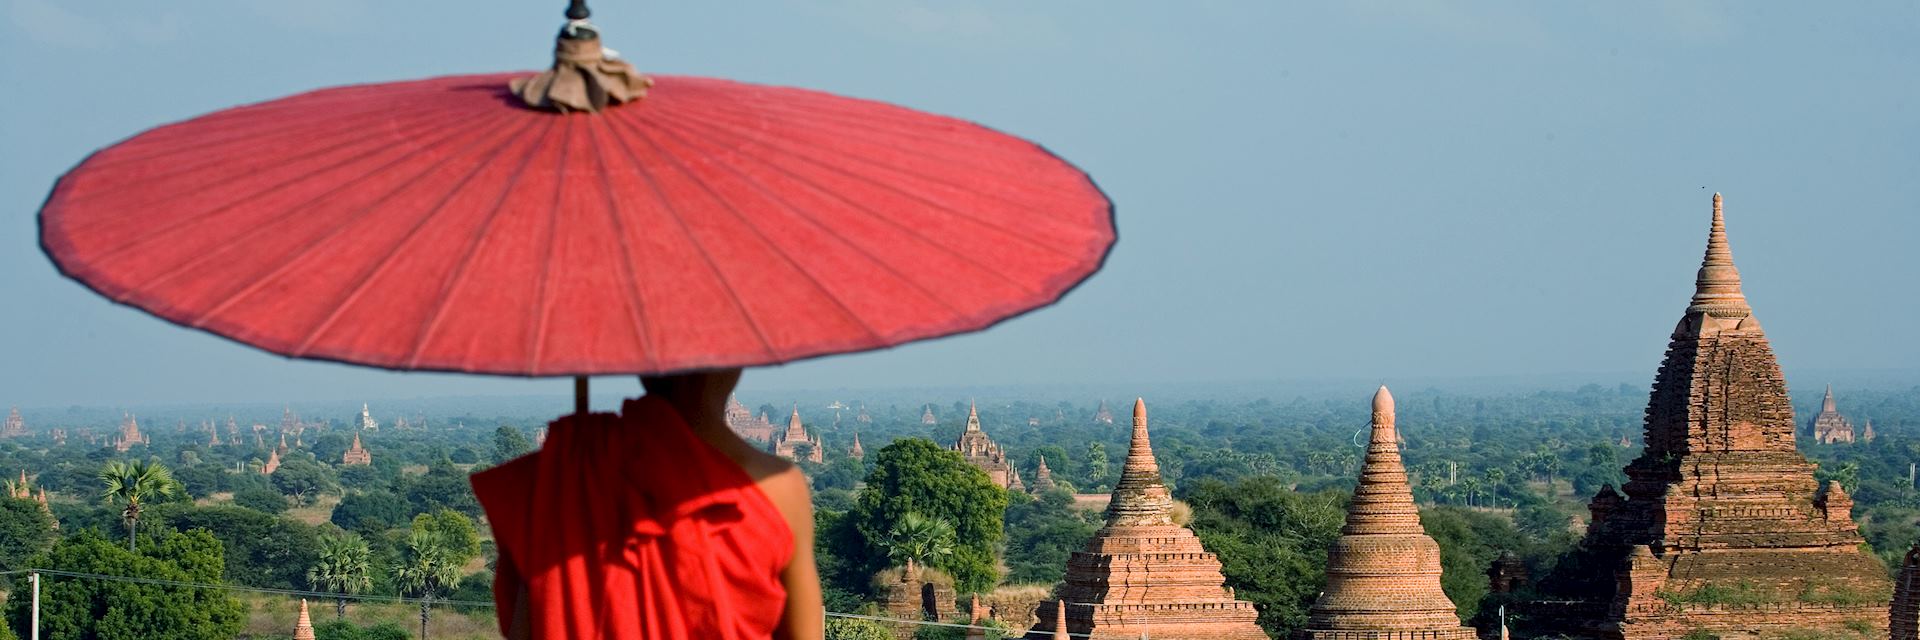 Monk looking out over Bagan's temples